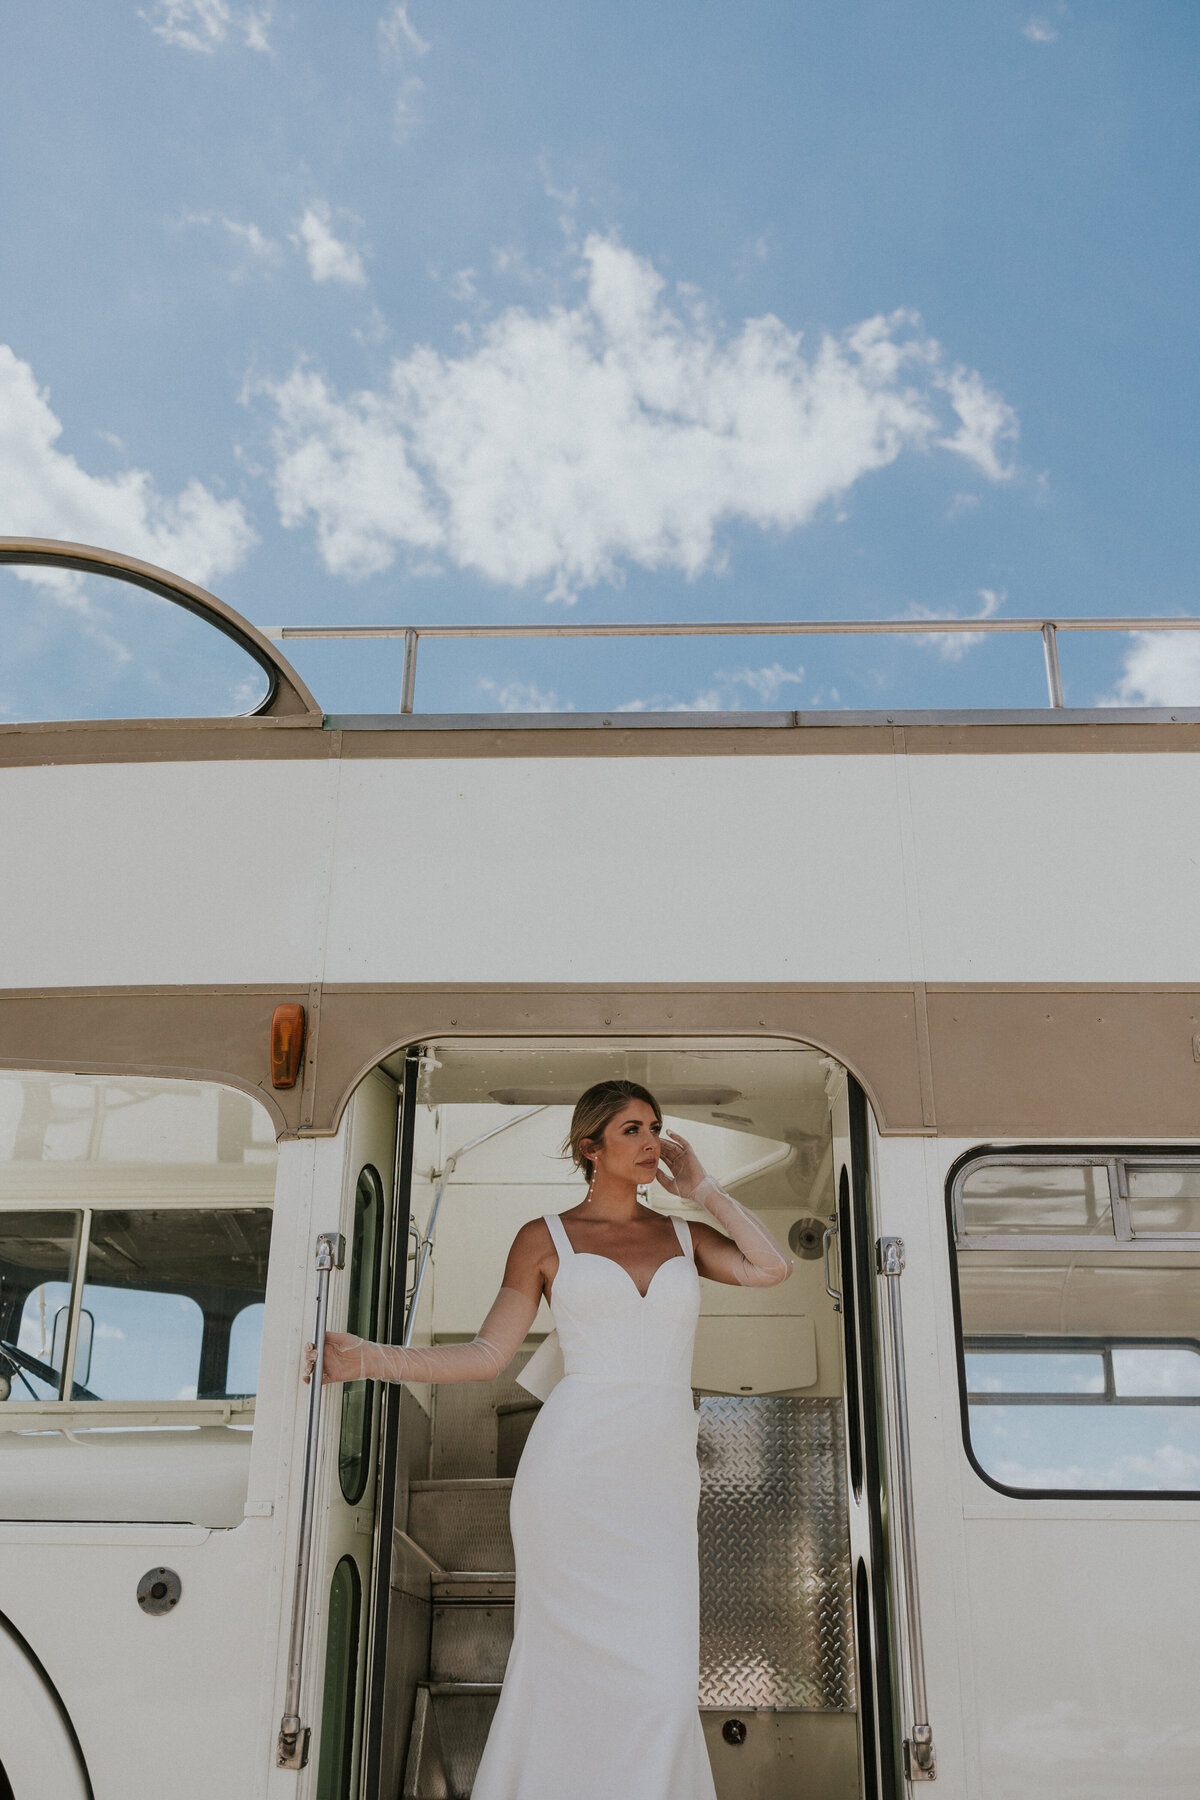 Bride stands at the doorway of double decker bus while cloud floats by in the sky at the top of the frame.